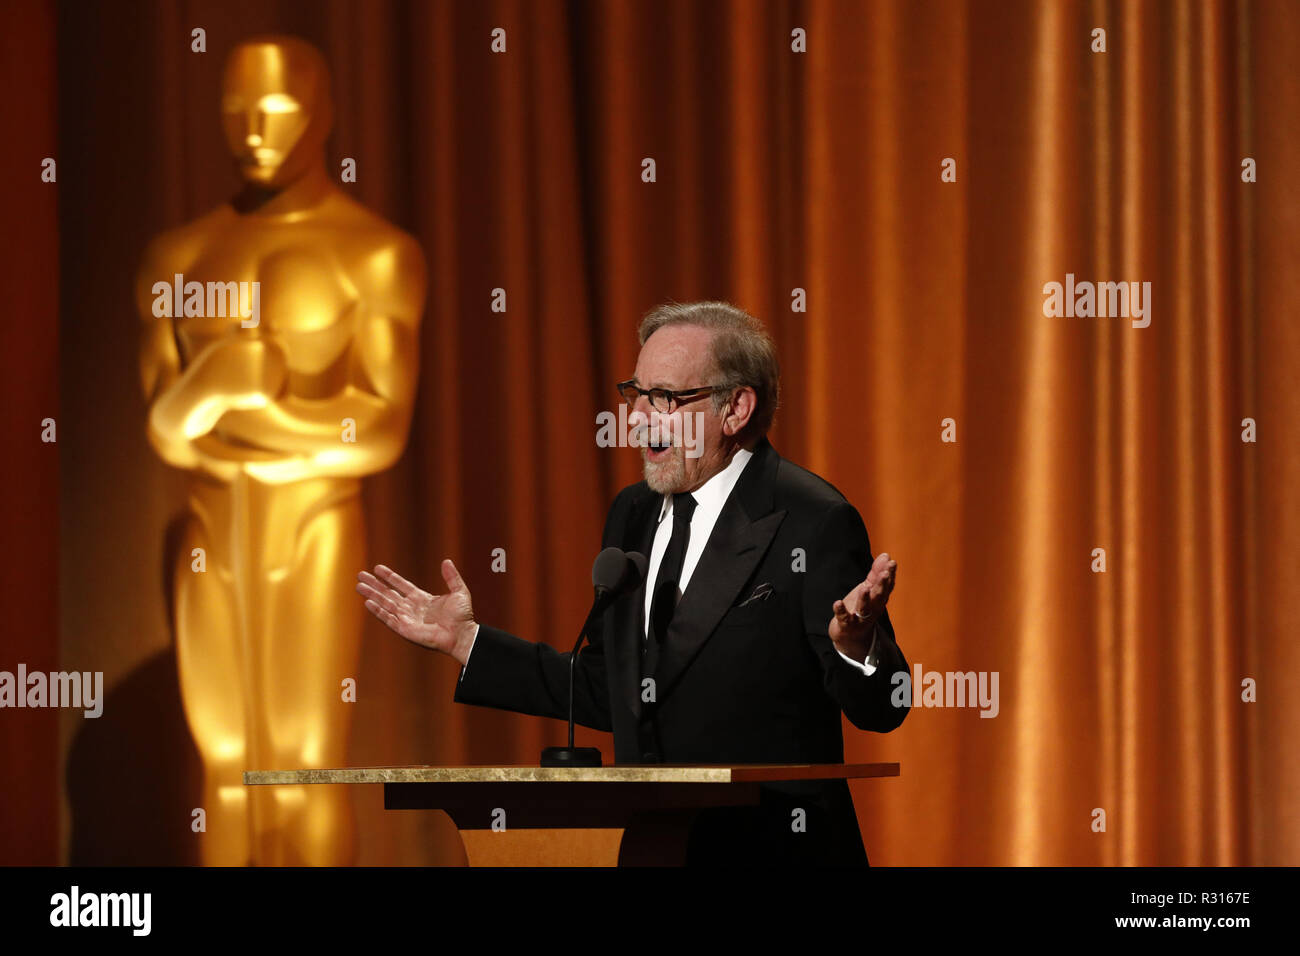 Hollywood, CA, USA. 18th Nov, 2018. Filmmaker Steven Spielberg present the Irving G. Thalberg Memorial Award during the Academy of Motion Picture Arts and Sciences (AMPAS) 10th Annual Governors Awards at the Dolby Ballroom on Sunday, November 18, 2018 in Hollywood, Calif. During the Governors Awards honorary OSCARS and other awards are presented for achievement. © 2018 Patrick T. Fallon Credit: Patrick Fallon/ZUMA Wire/Alamy Live News Stock Photo